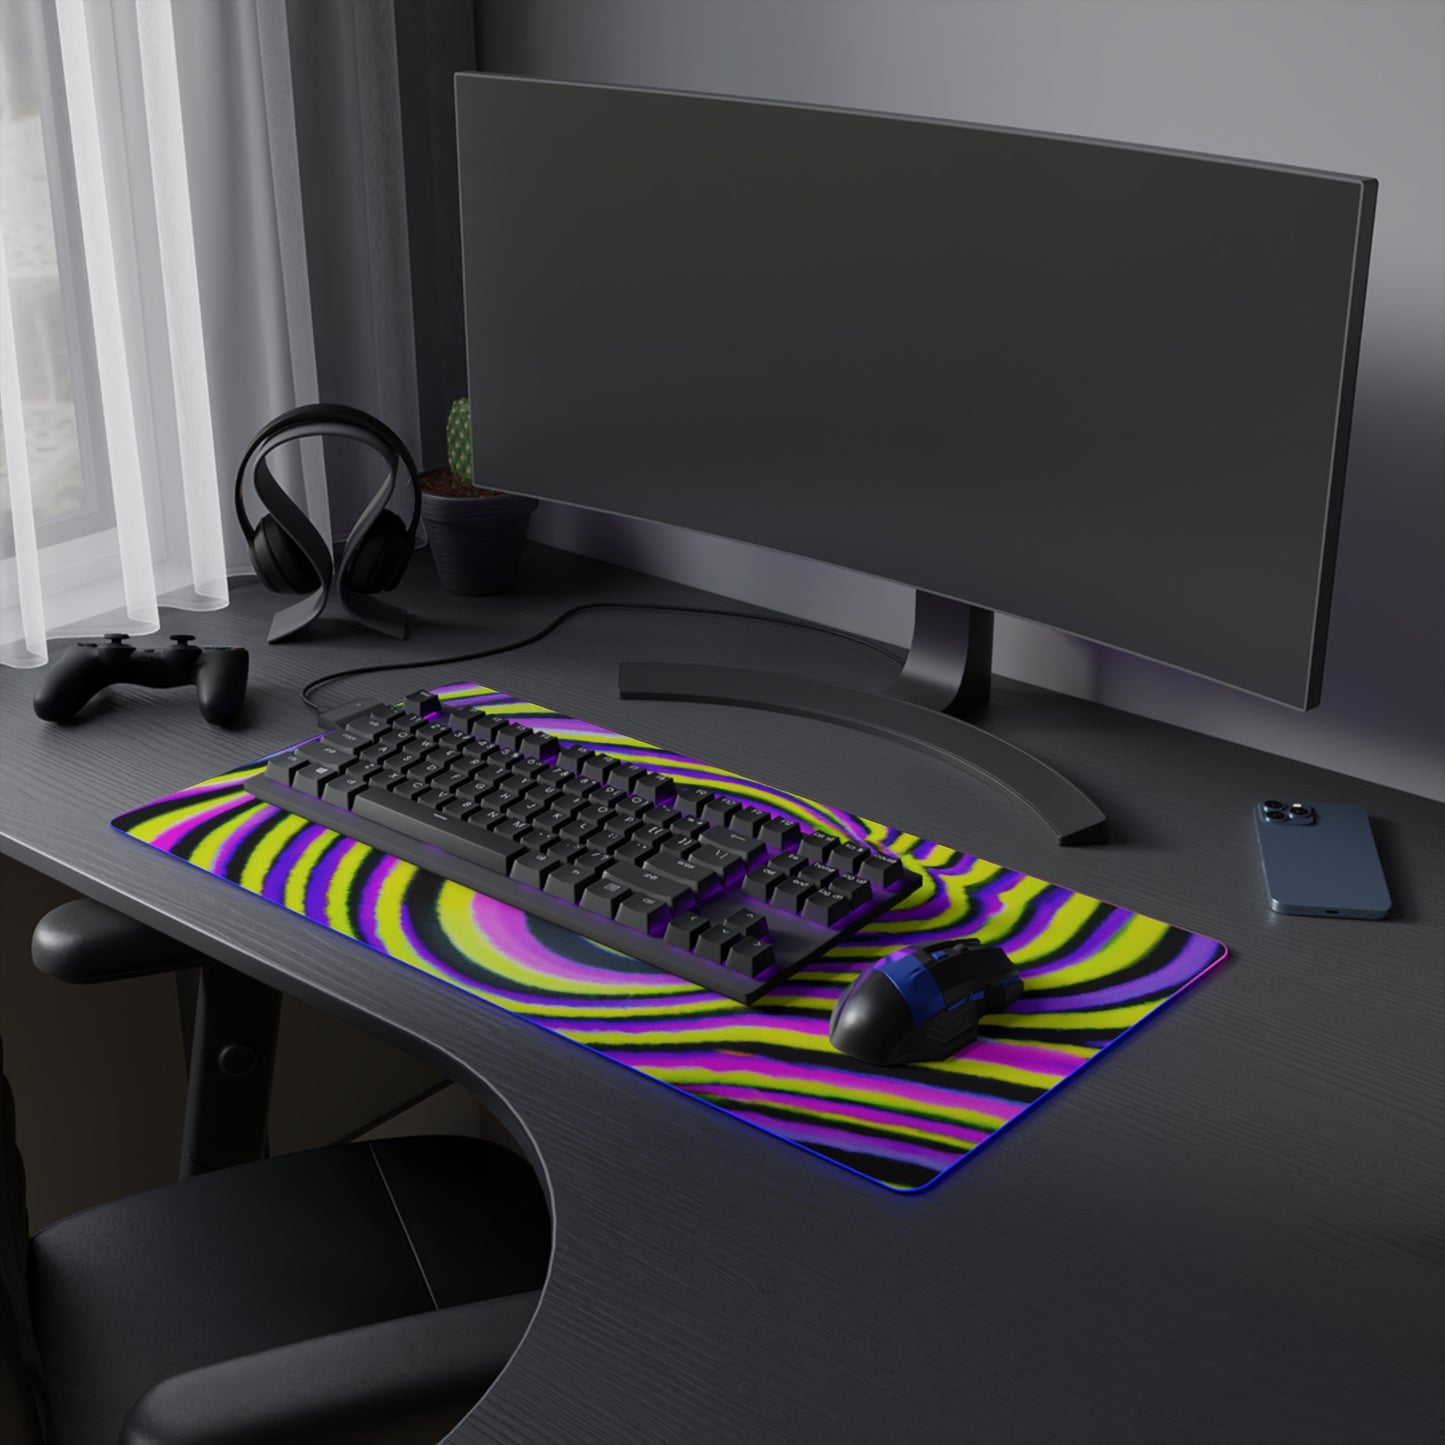 Brighton Blastoff - Psychedelic Trippy LED Light Up Gaming Mouse Pad